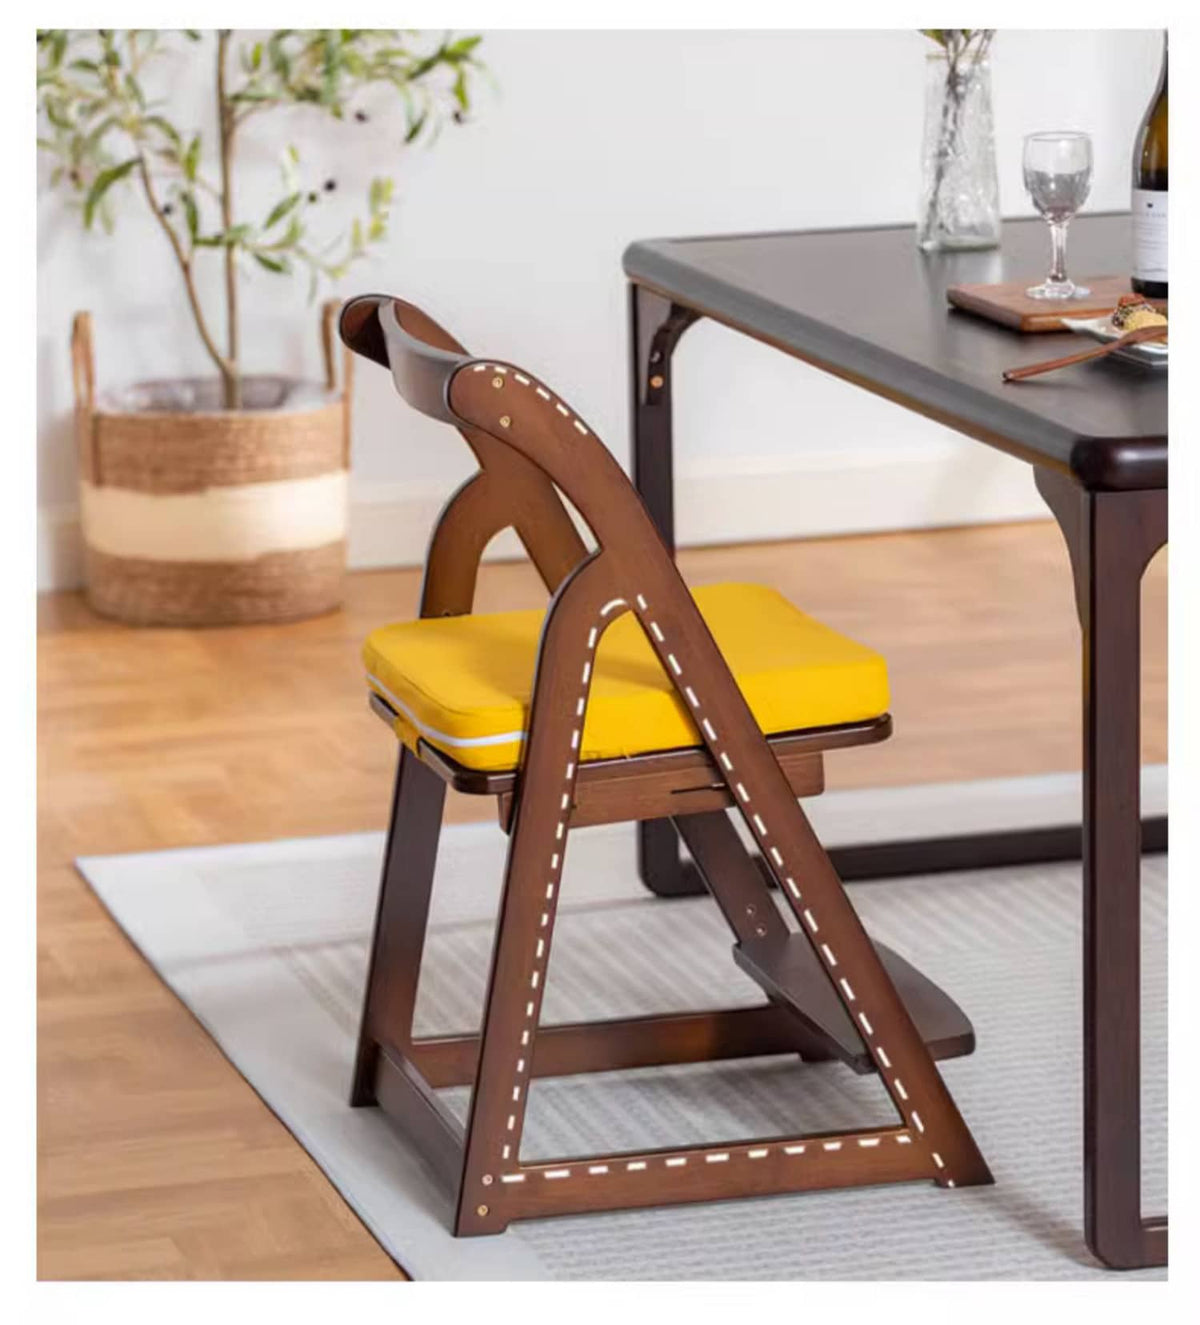 Elegant Dark Brown Bamboo Chair with Natural Wood Canvas - Stylish & Durable Seating hsl-67